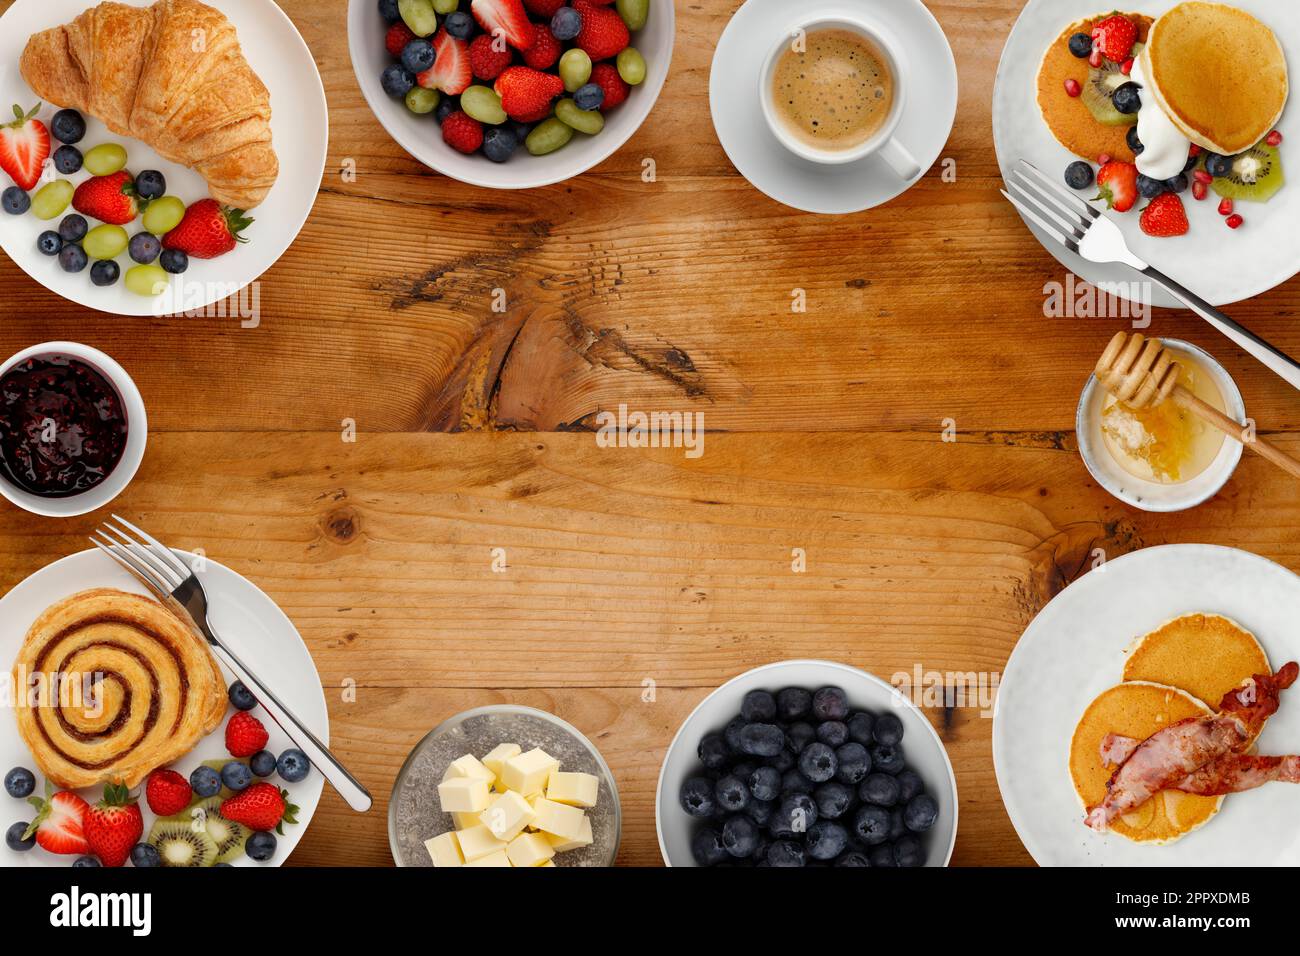 A border of delicious breakfast plates, pancakes and pasteries, bowls of fruit and porridge, and cups of coffee, on a rustic wooden background Stock Photo